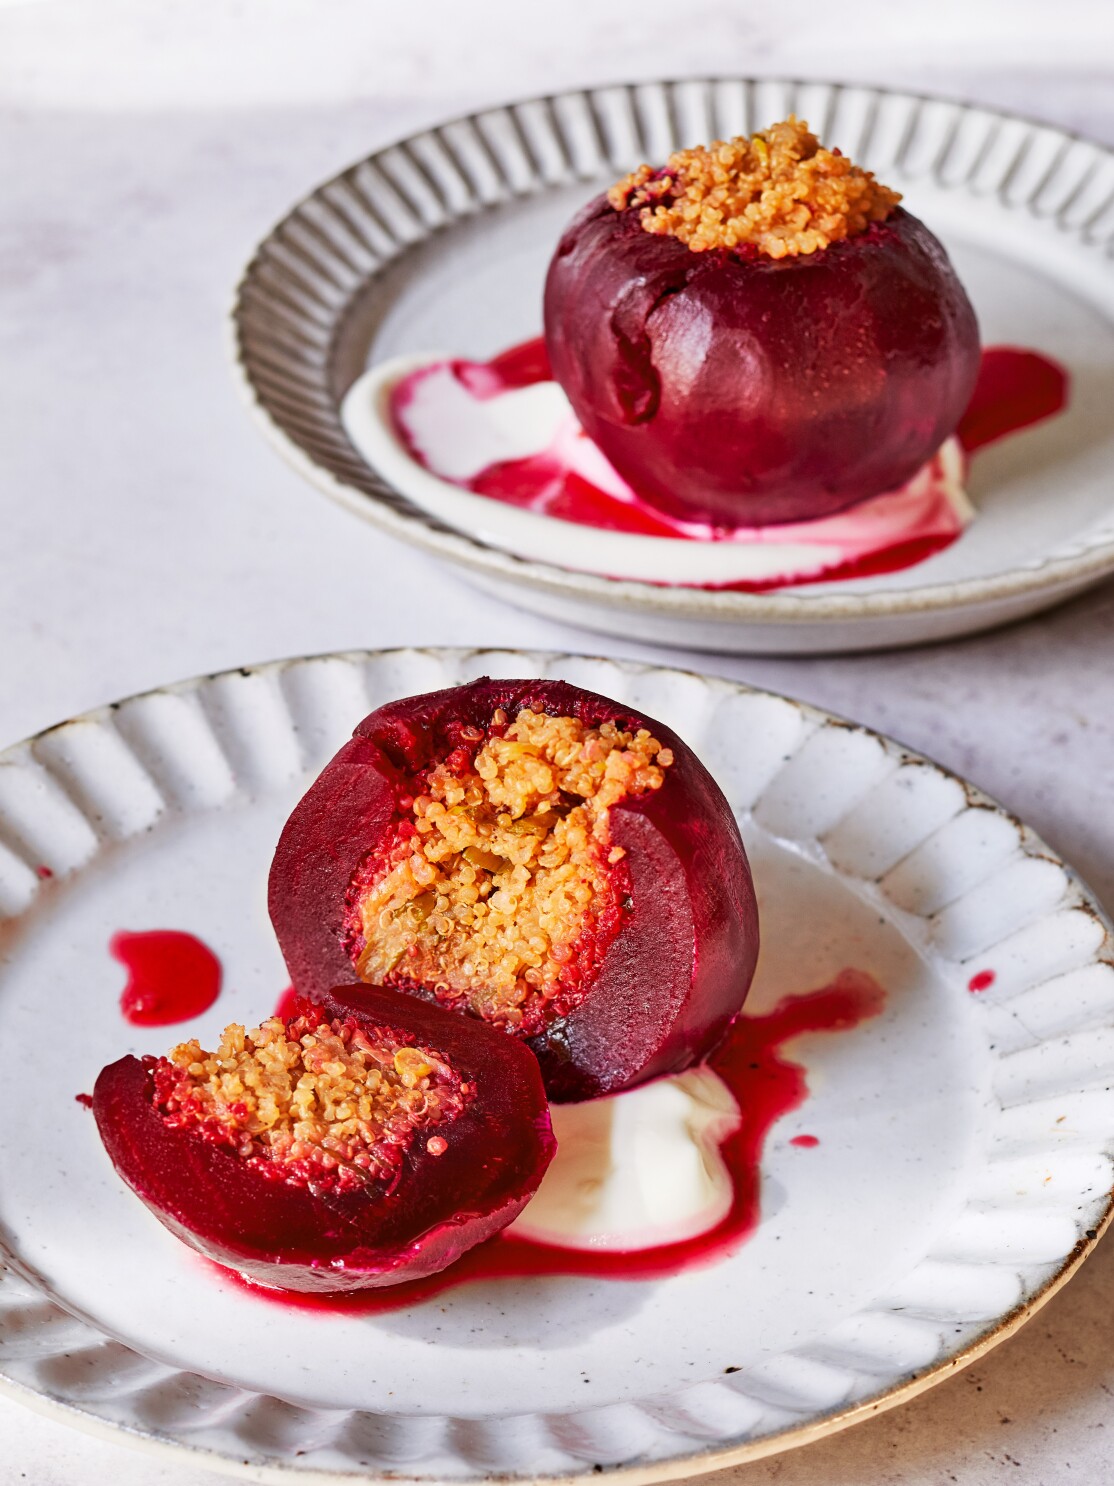 Einat Admony S Stuffed Beets Recipe With Quinoa For Yom Kippur And Sukkot Los Angeles Times